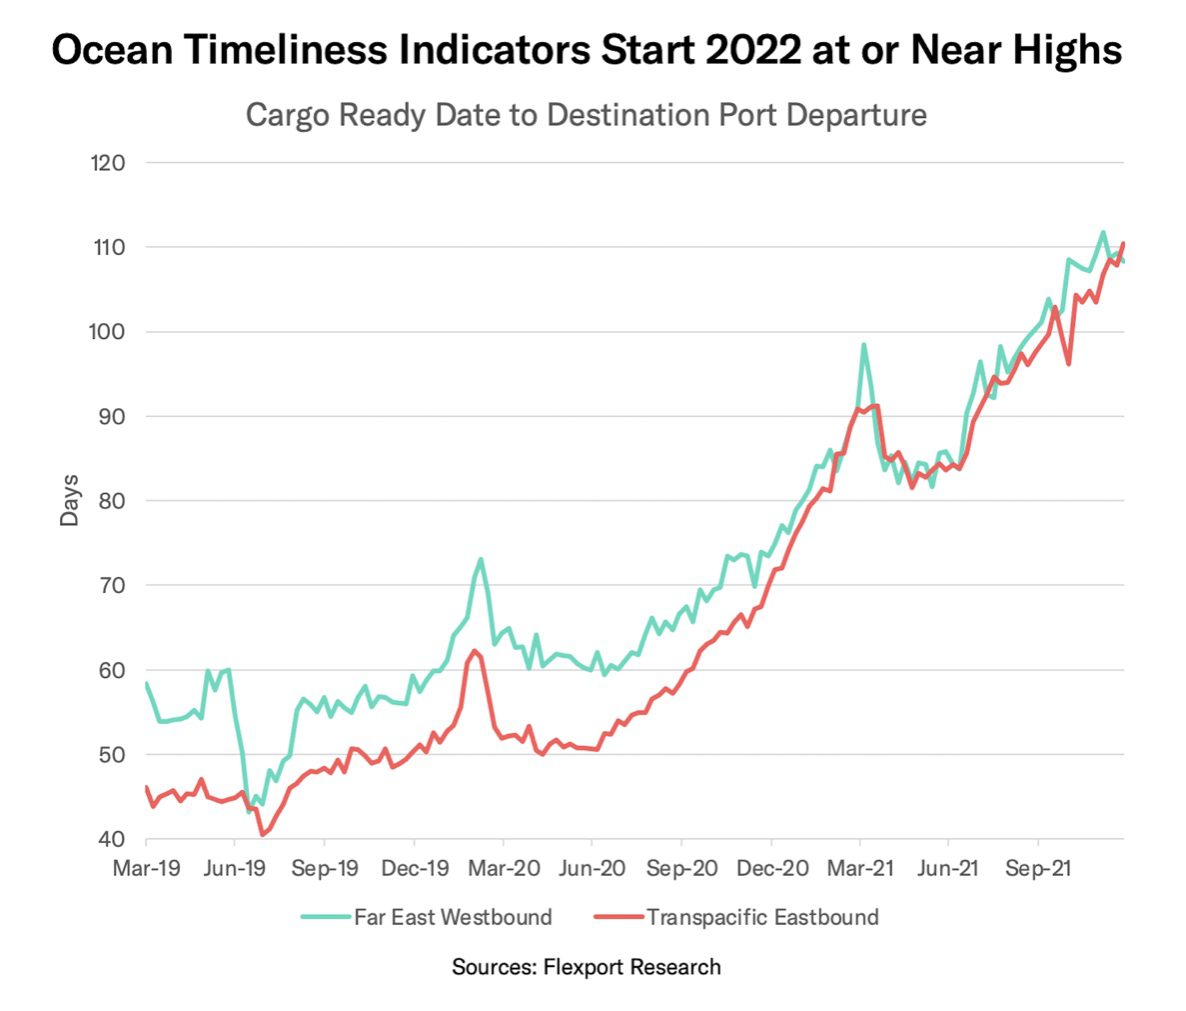 Chart showing ocean timeliness indicators at the start of 2022